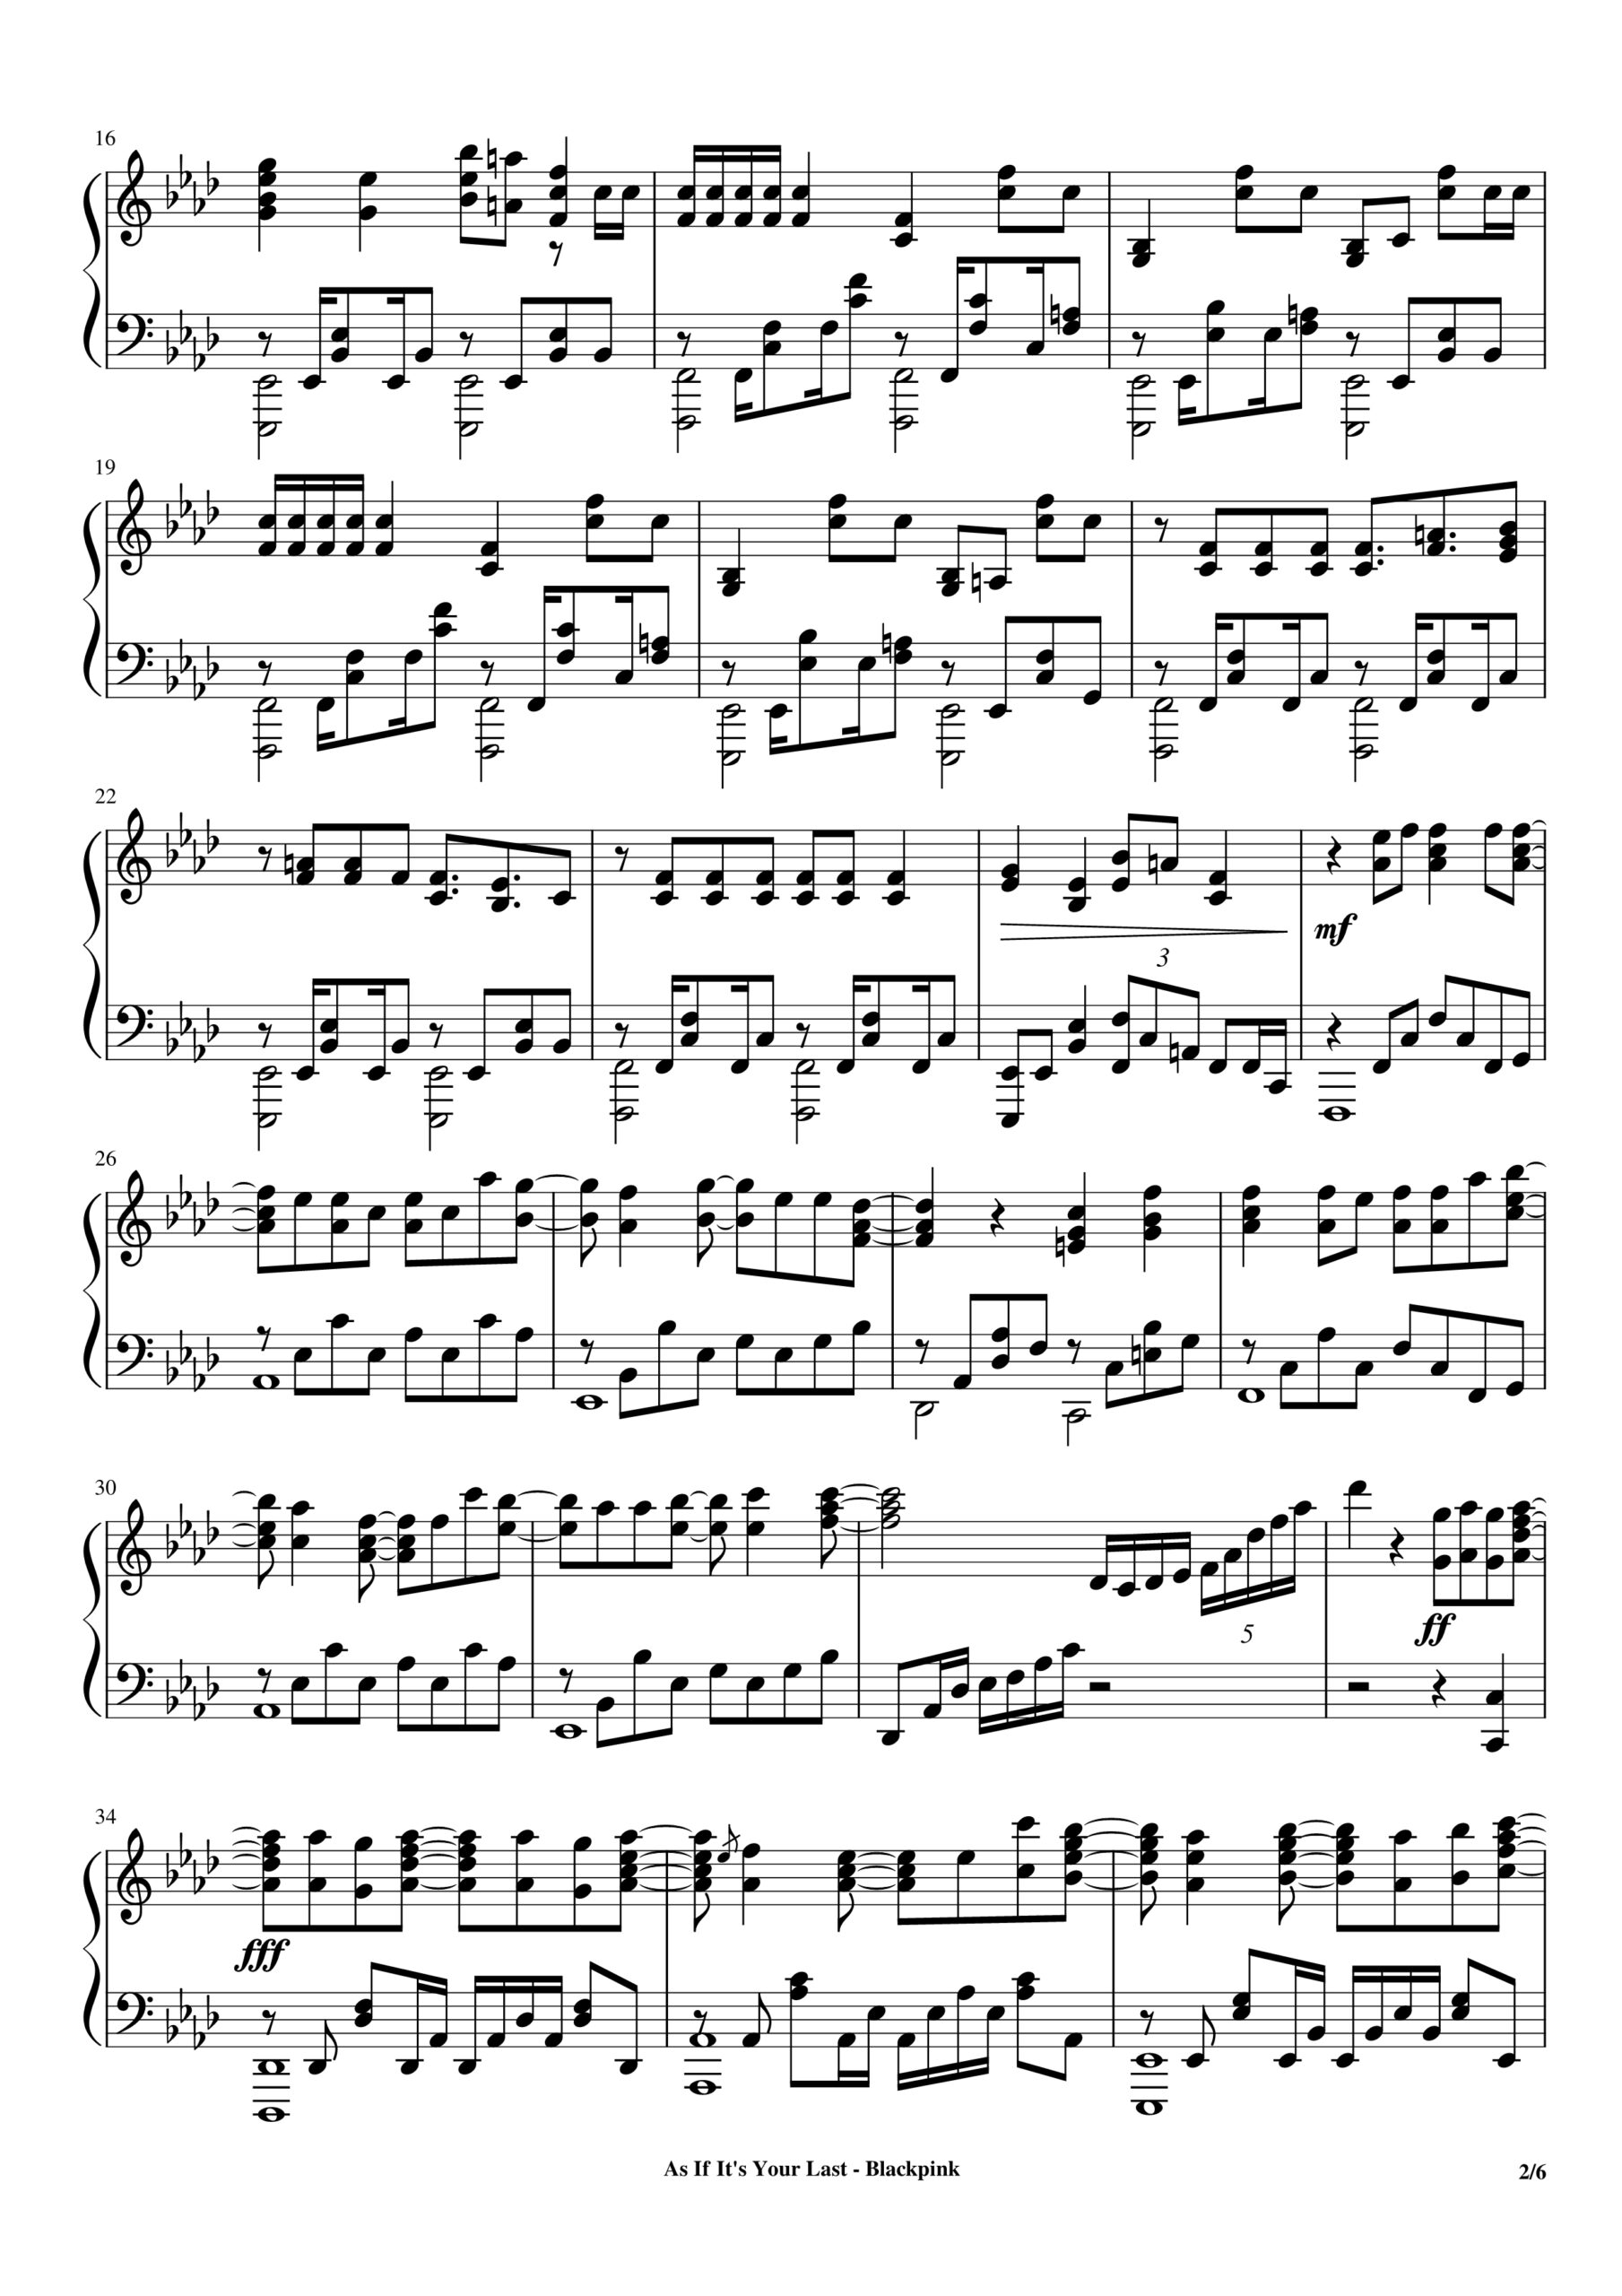 Blackpink, As If It's Your Last Piano Sheet Music Page 2